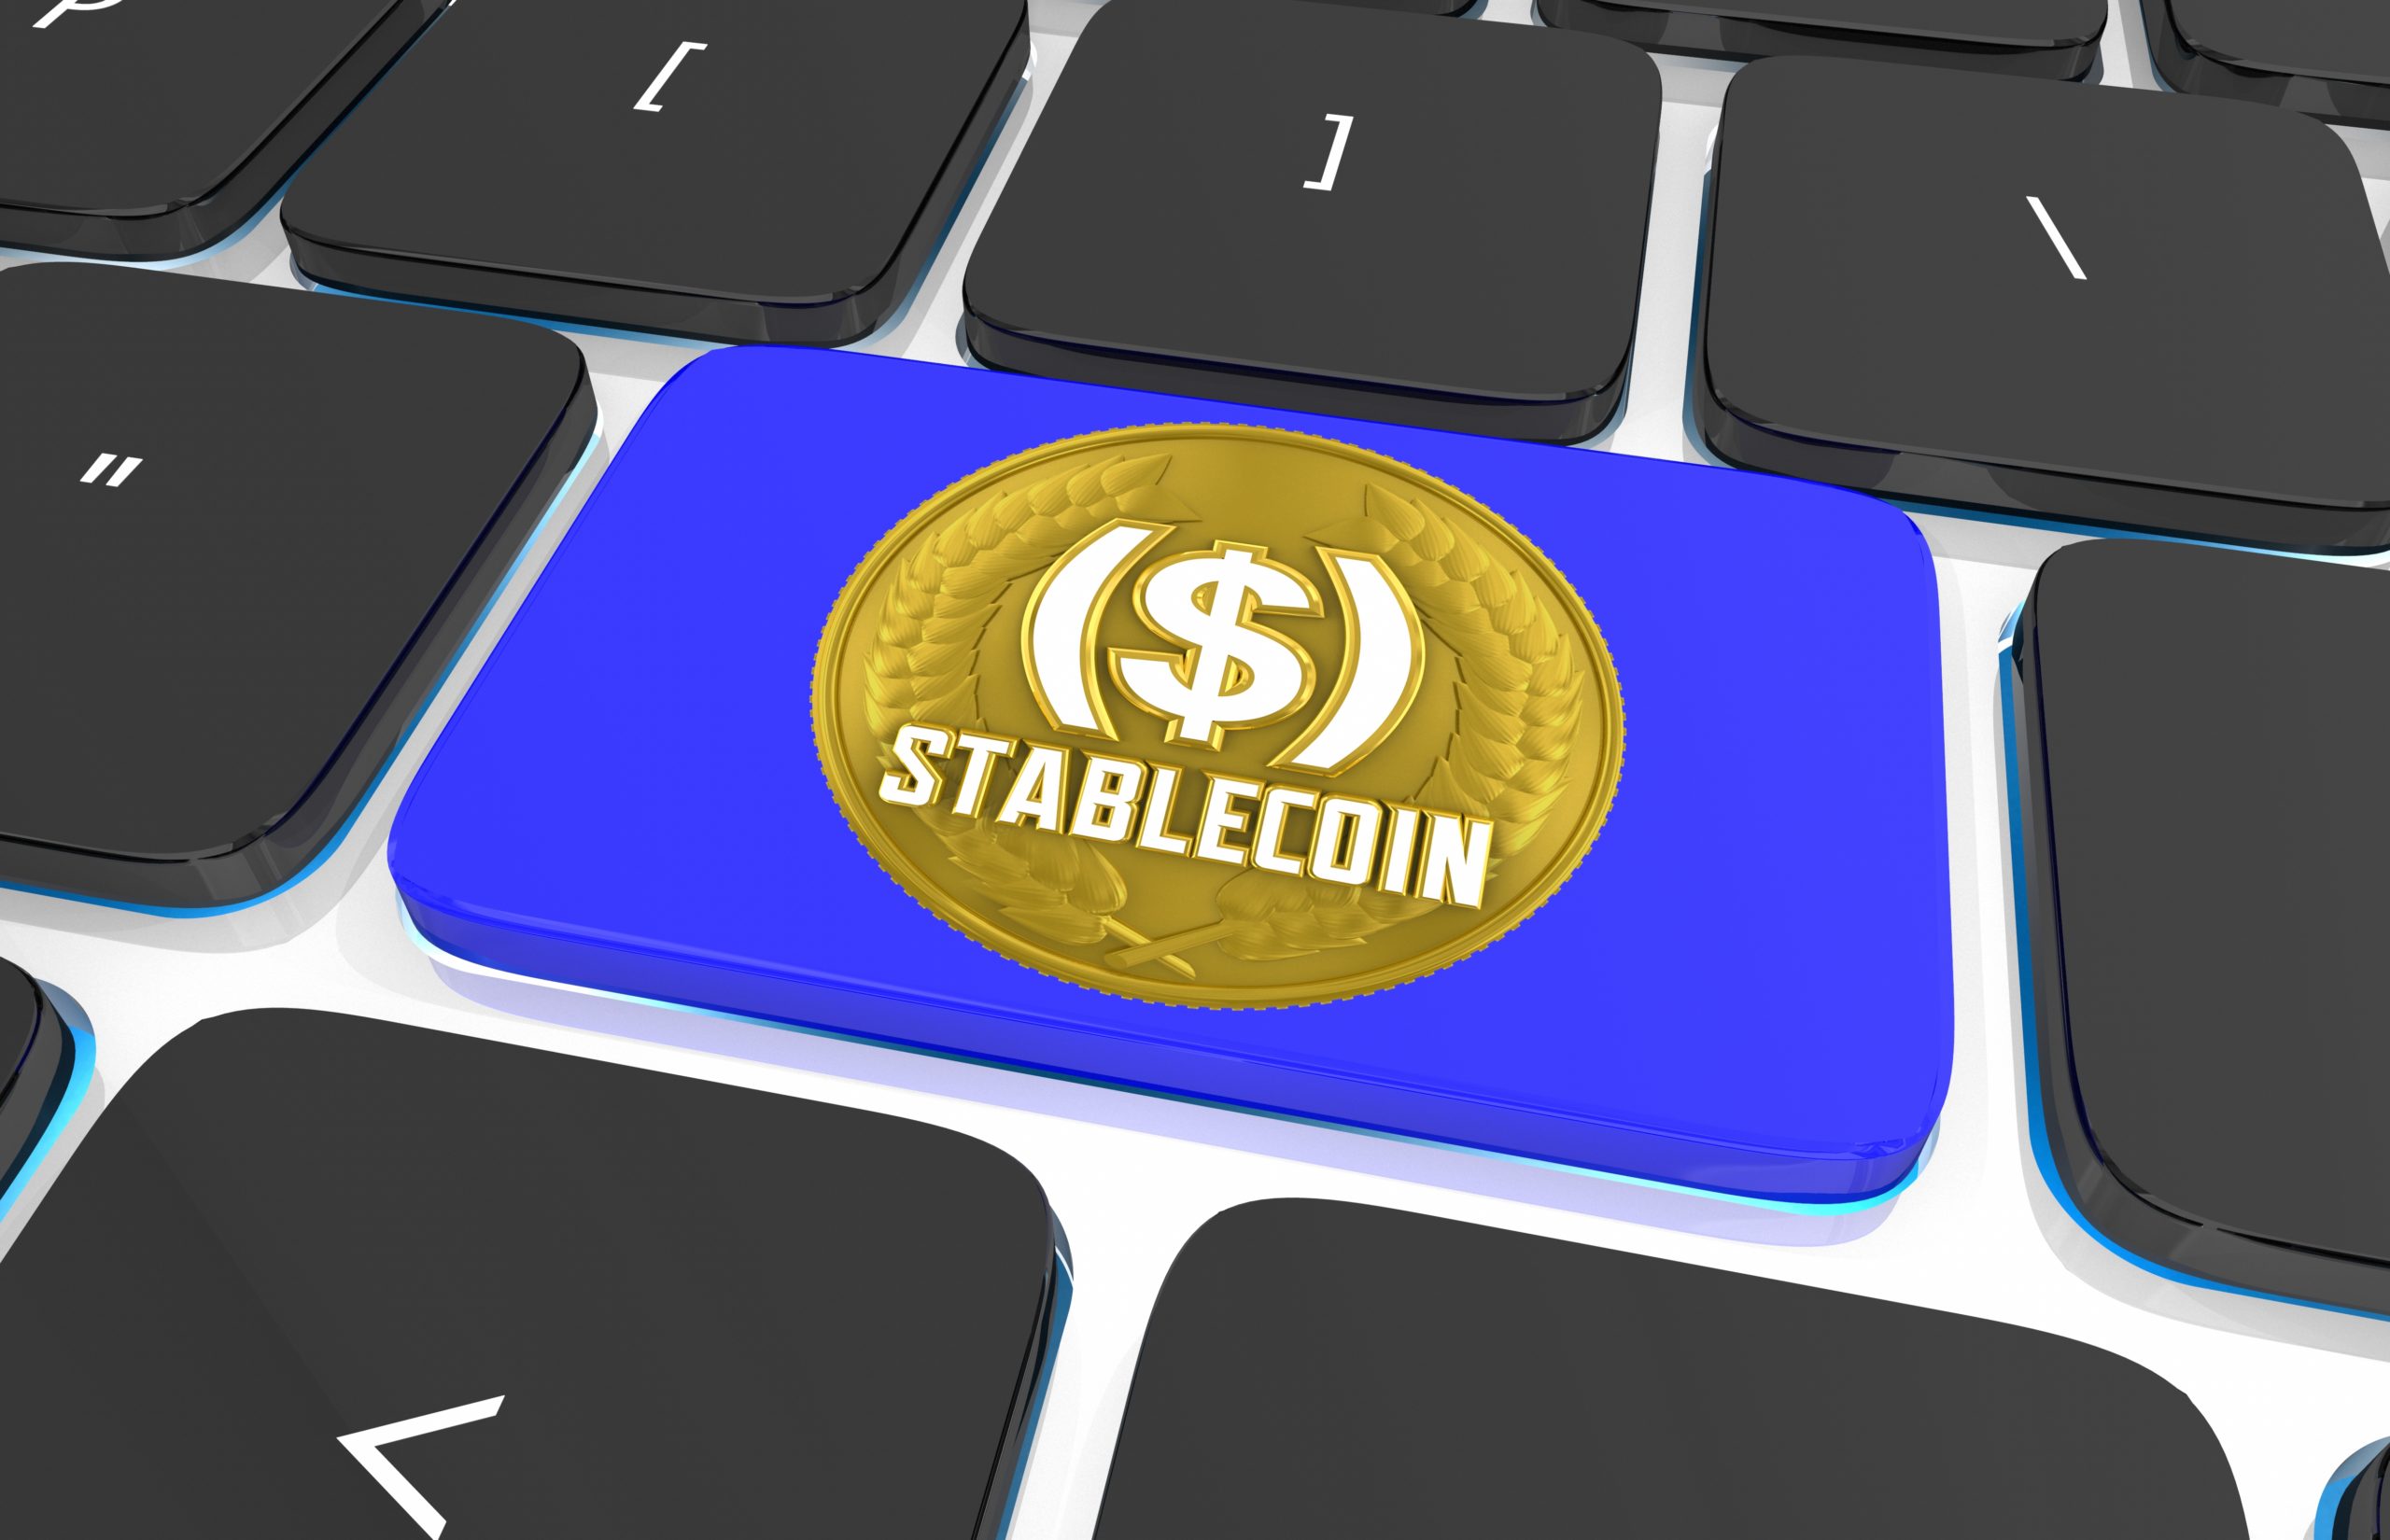 Best Stablecoins To Invest In 2022 – Top 6 Crypto Stablecoins Ranked